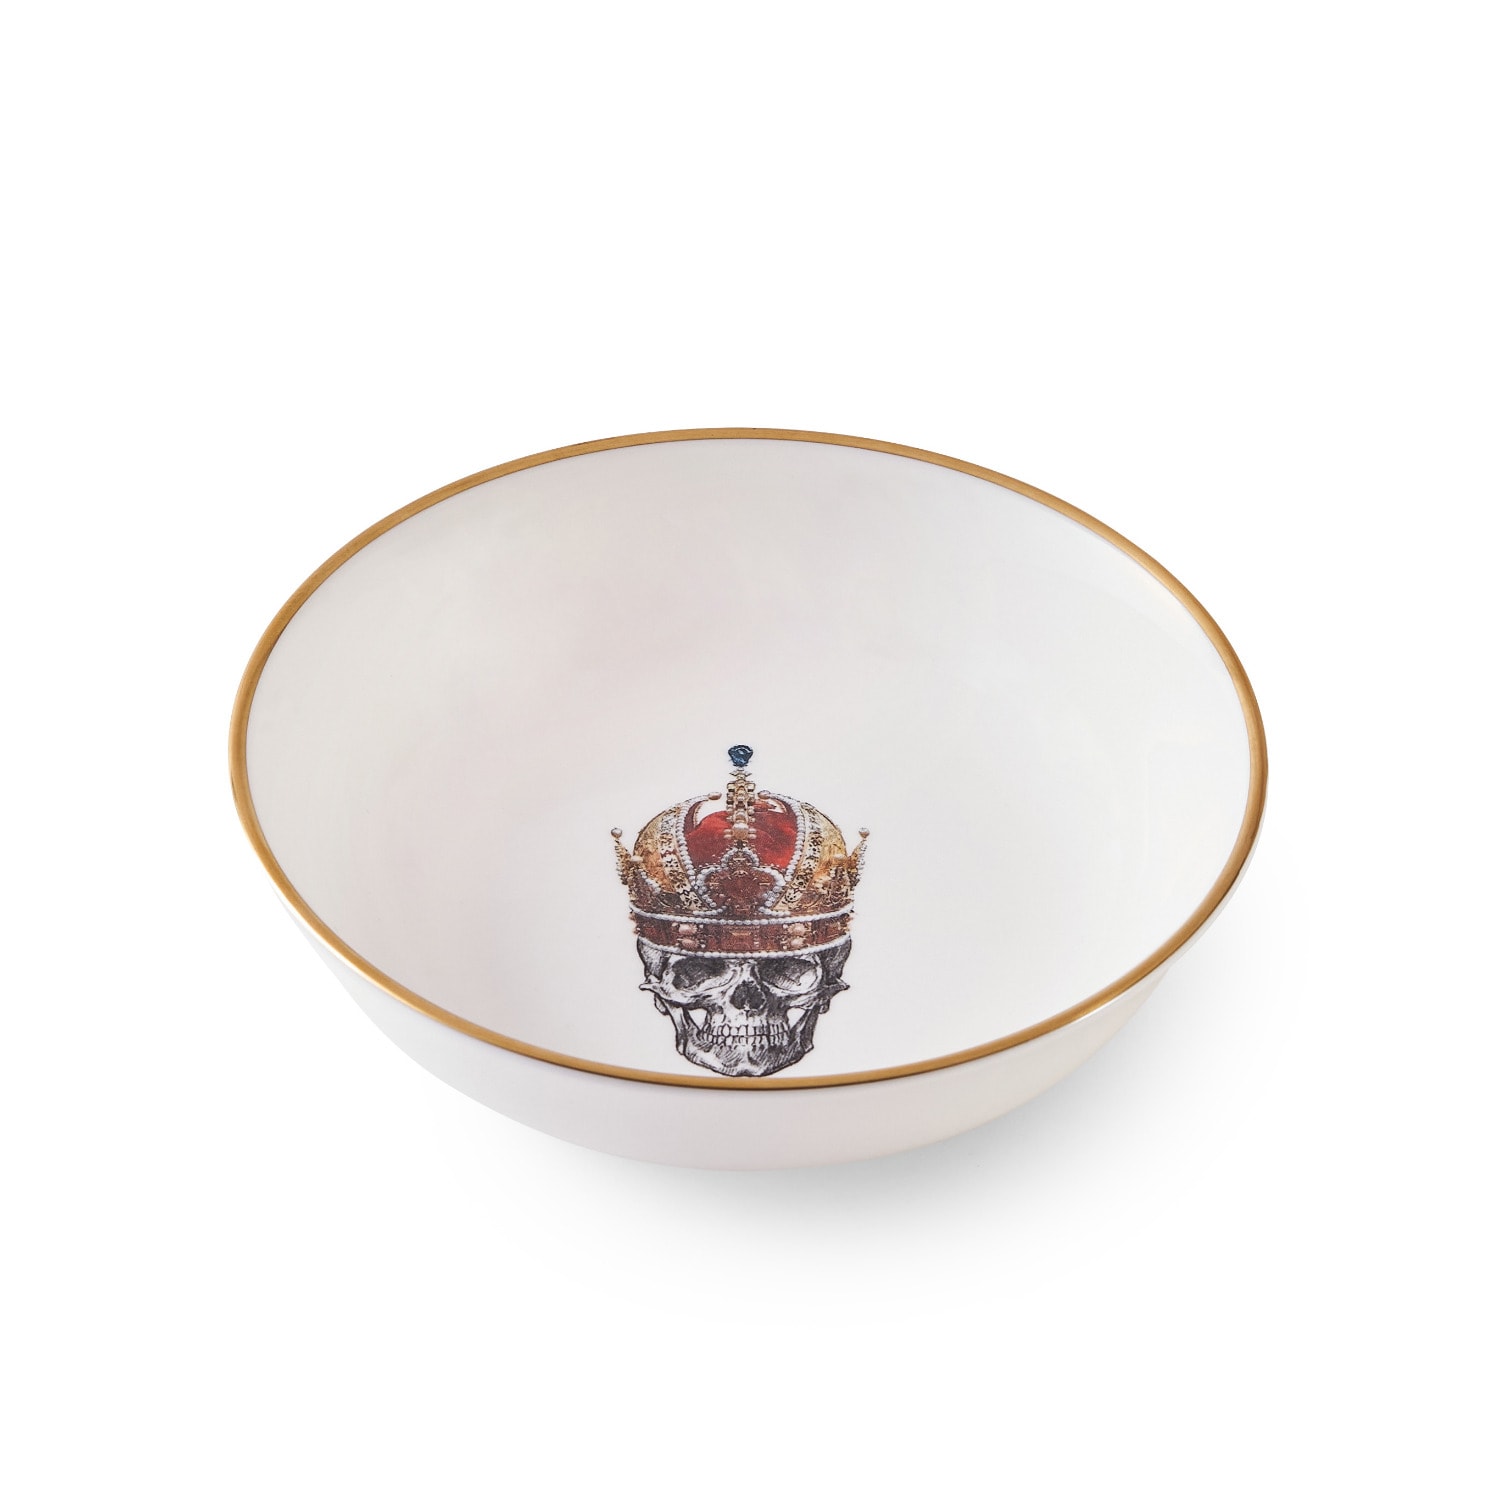 White / Gold / Red Skull In Red Crown Bone China Soup/Cereal Bowl 17Cm Melody Rose London